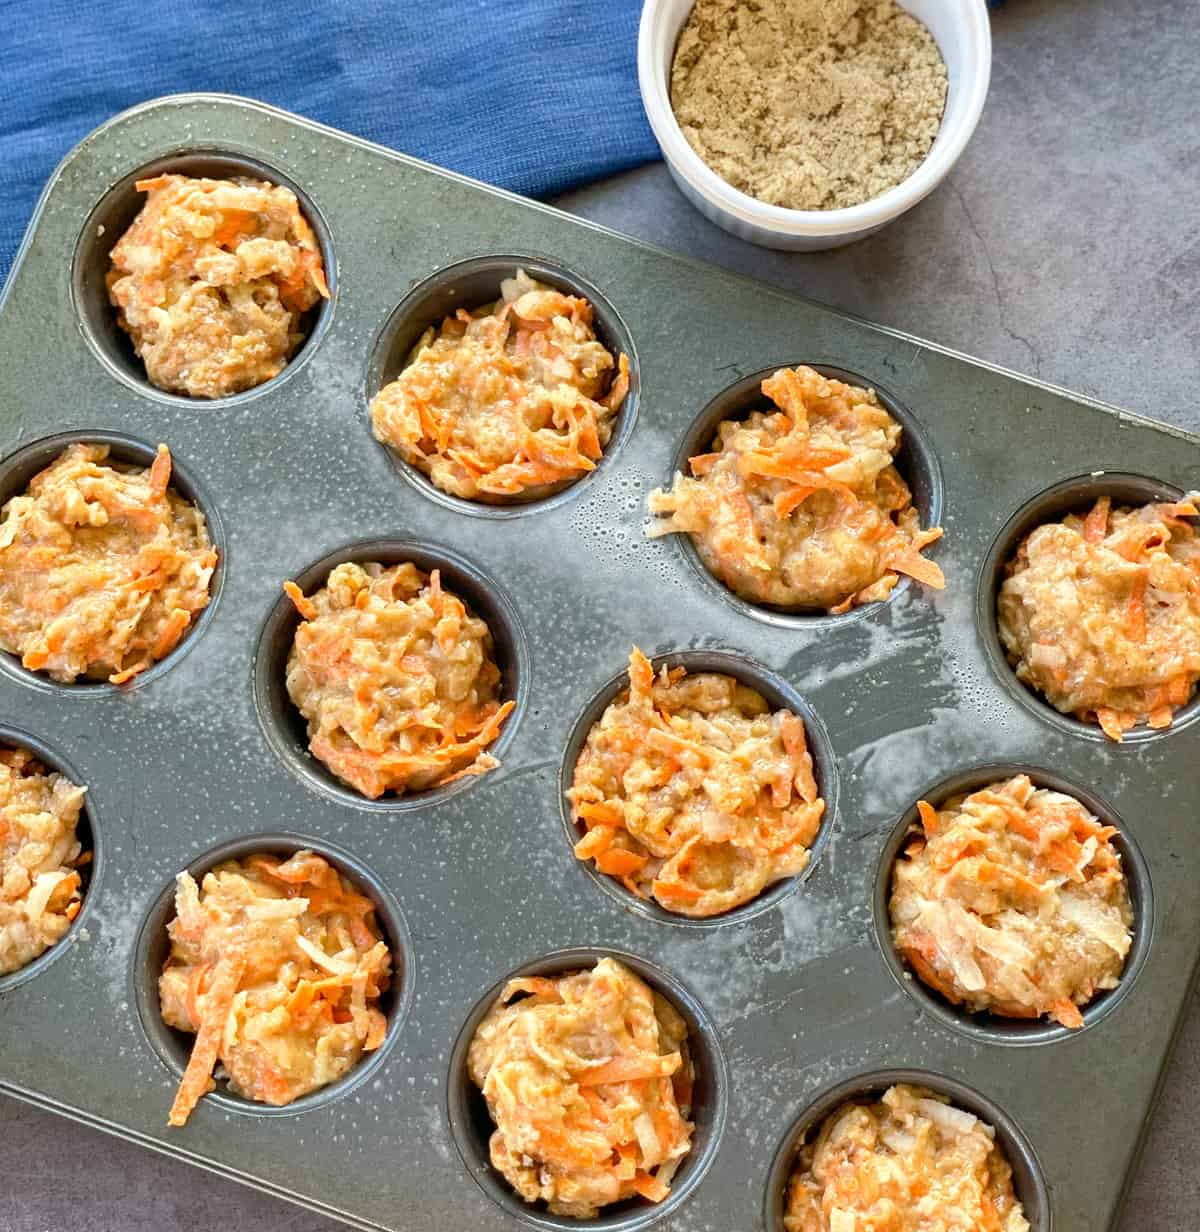 Apple and carrot muffins in a muffin tray before baking with a bowl of sugar for sprinkling 